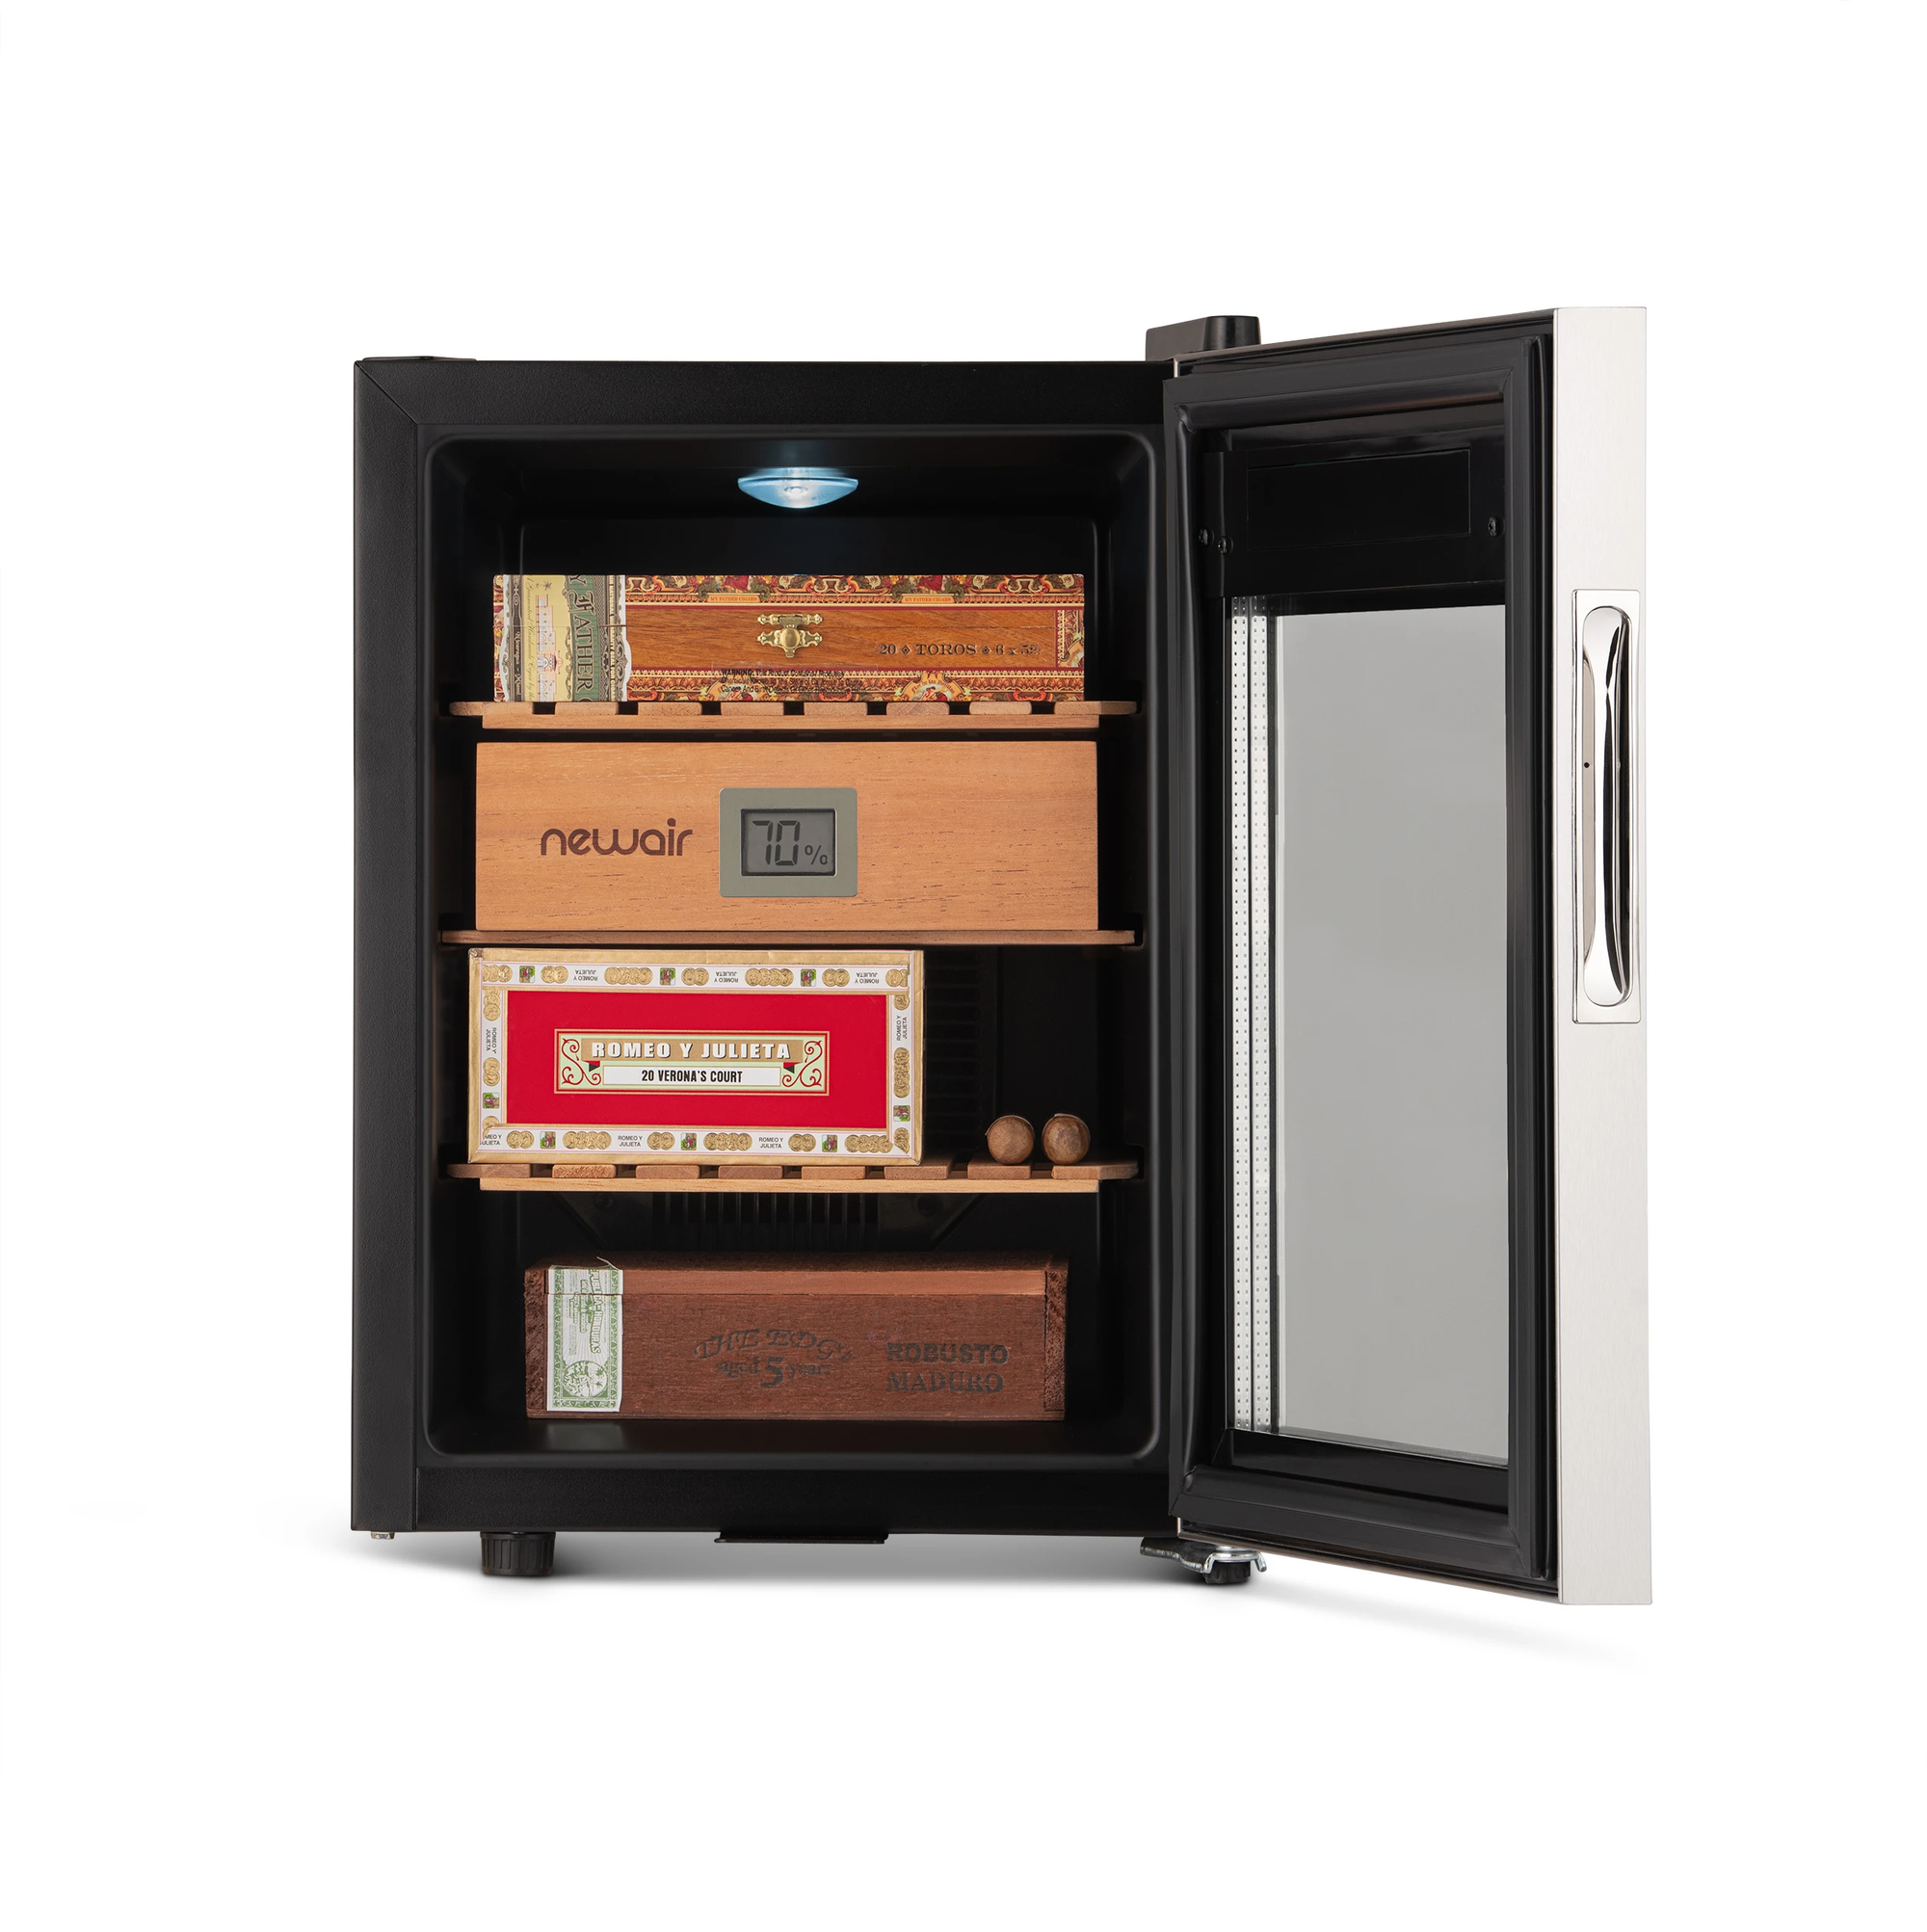 Are Electric Humidors better than Regular Humidors?